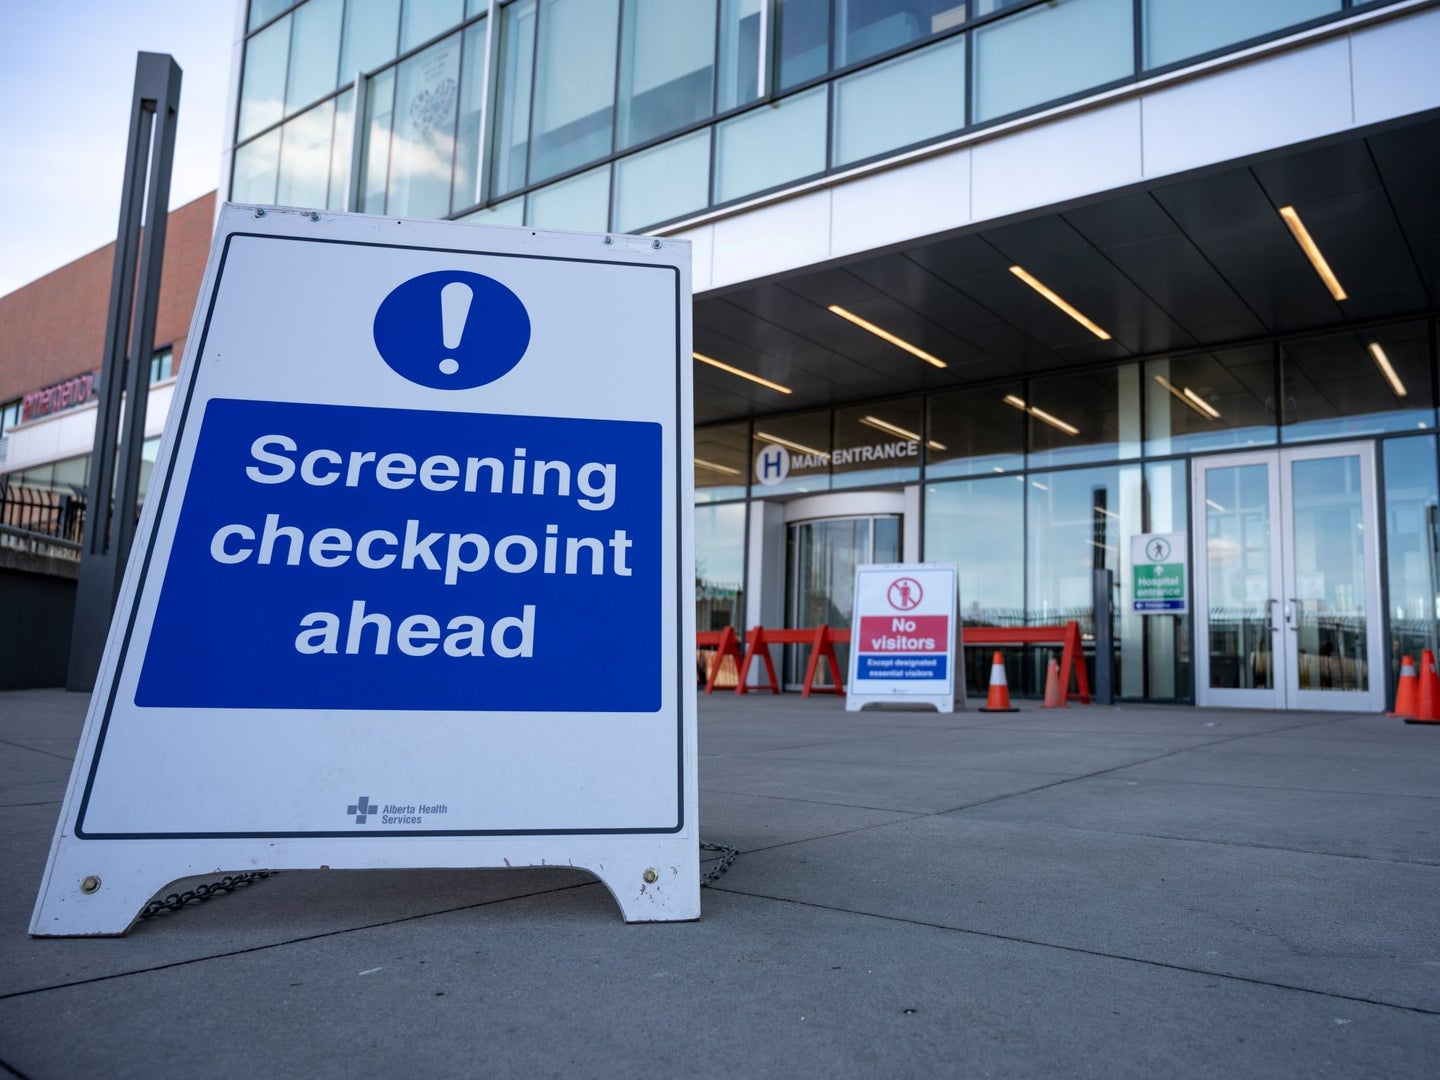 A sign that says "Screening checkpoint ahead" placed in front of the door to a hospital